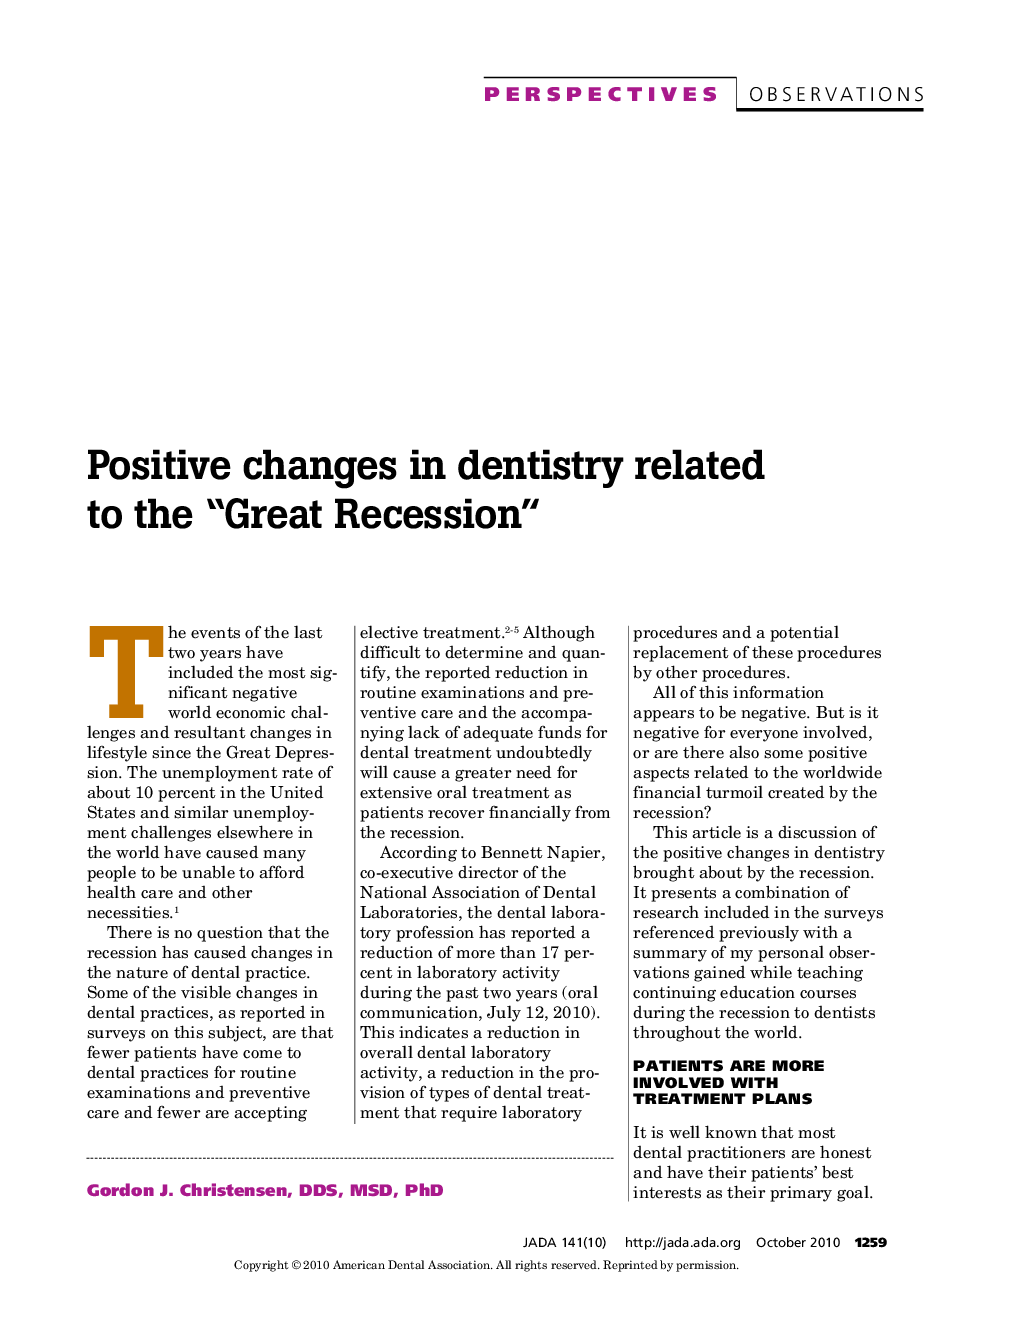 Positive Changes in Dentistry Related to the “Great Recession”